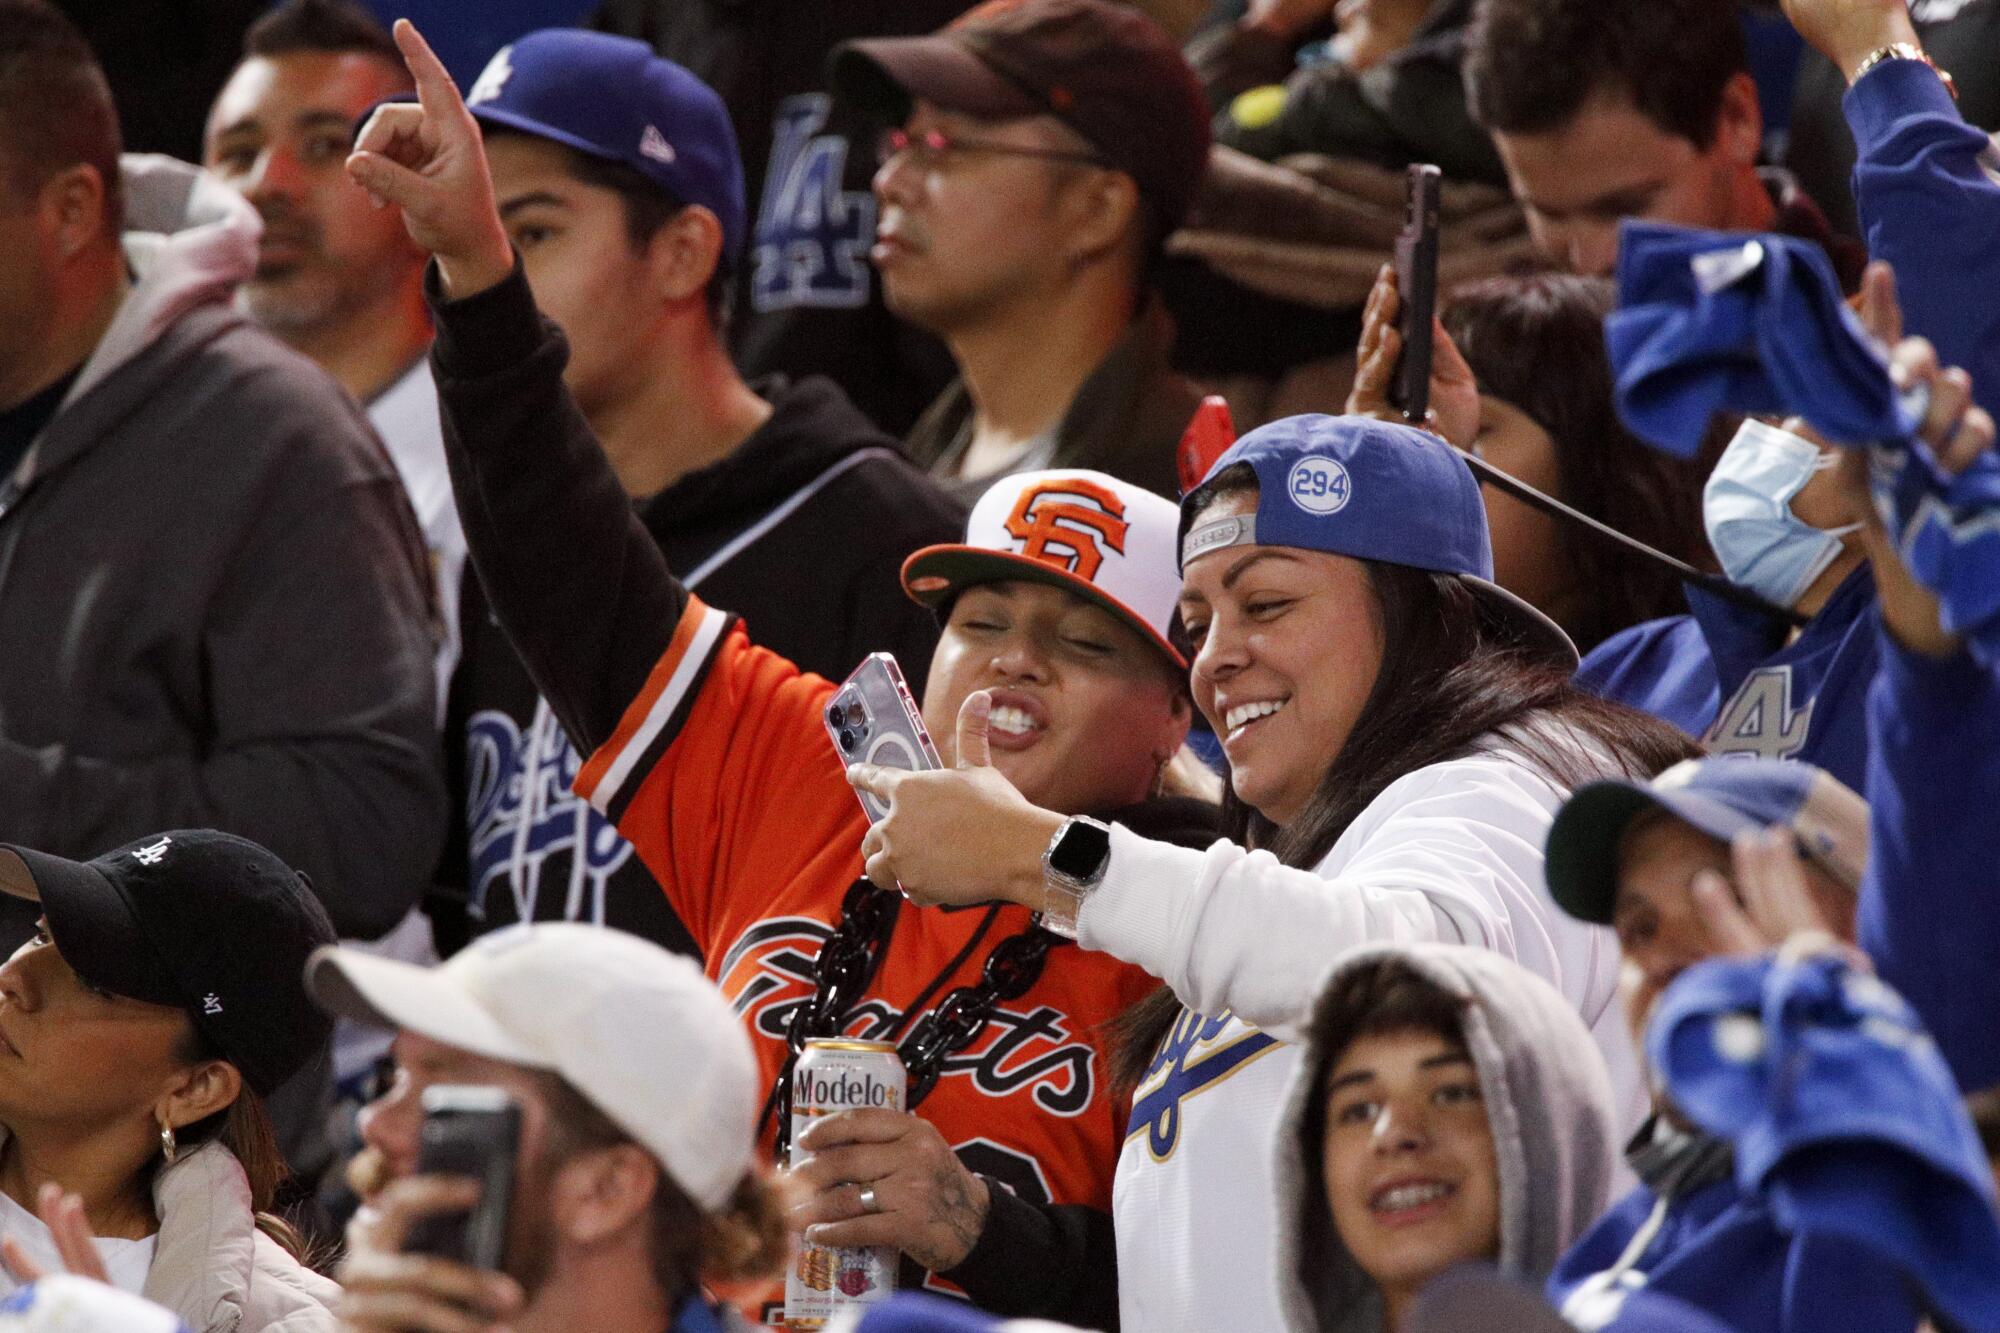 A San Francisco Giants looks at a phone with a Los Angeles Dodgers fan in the stands